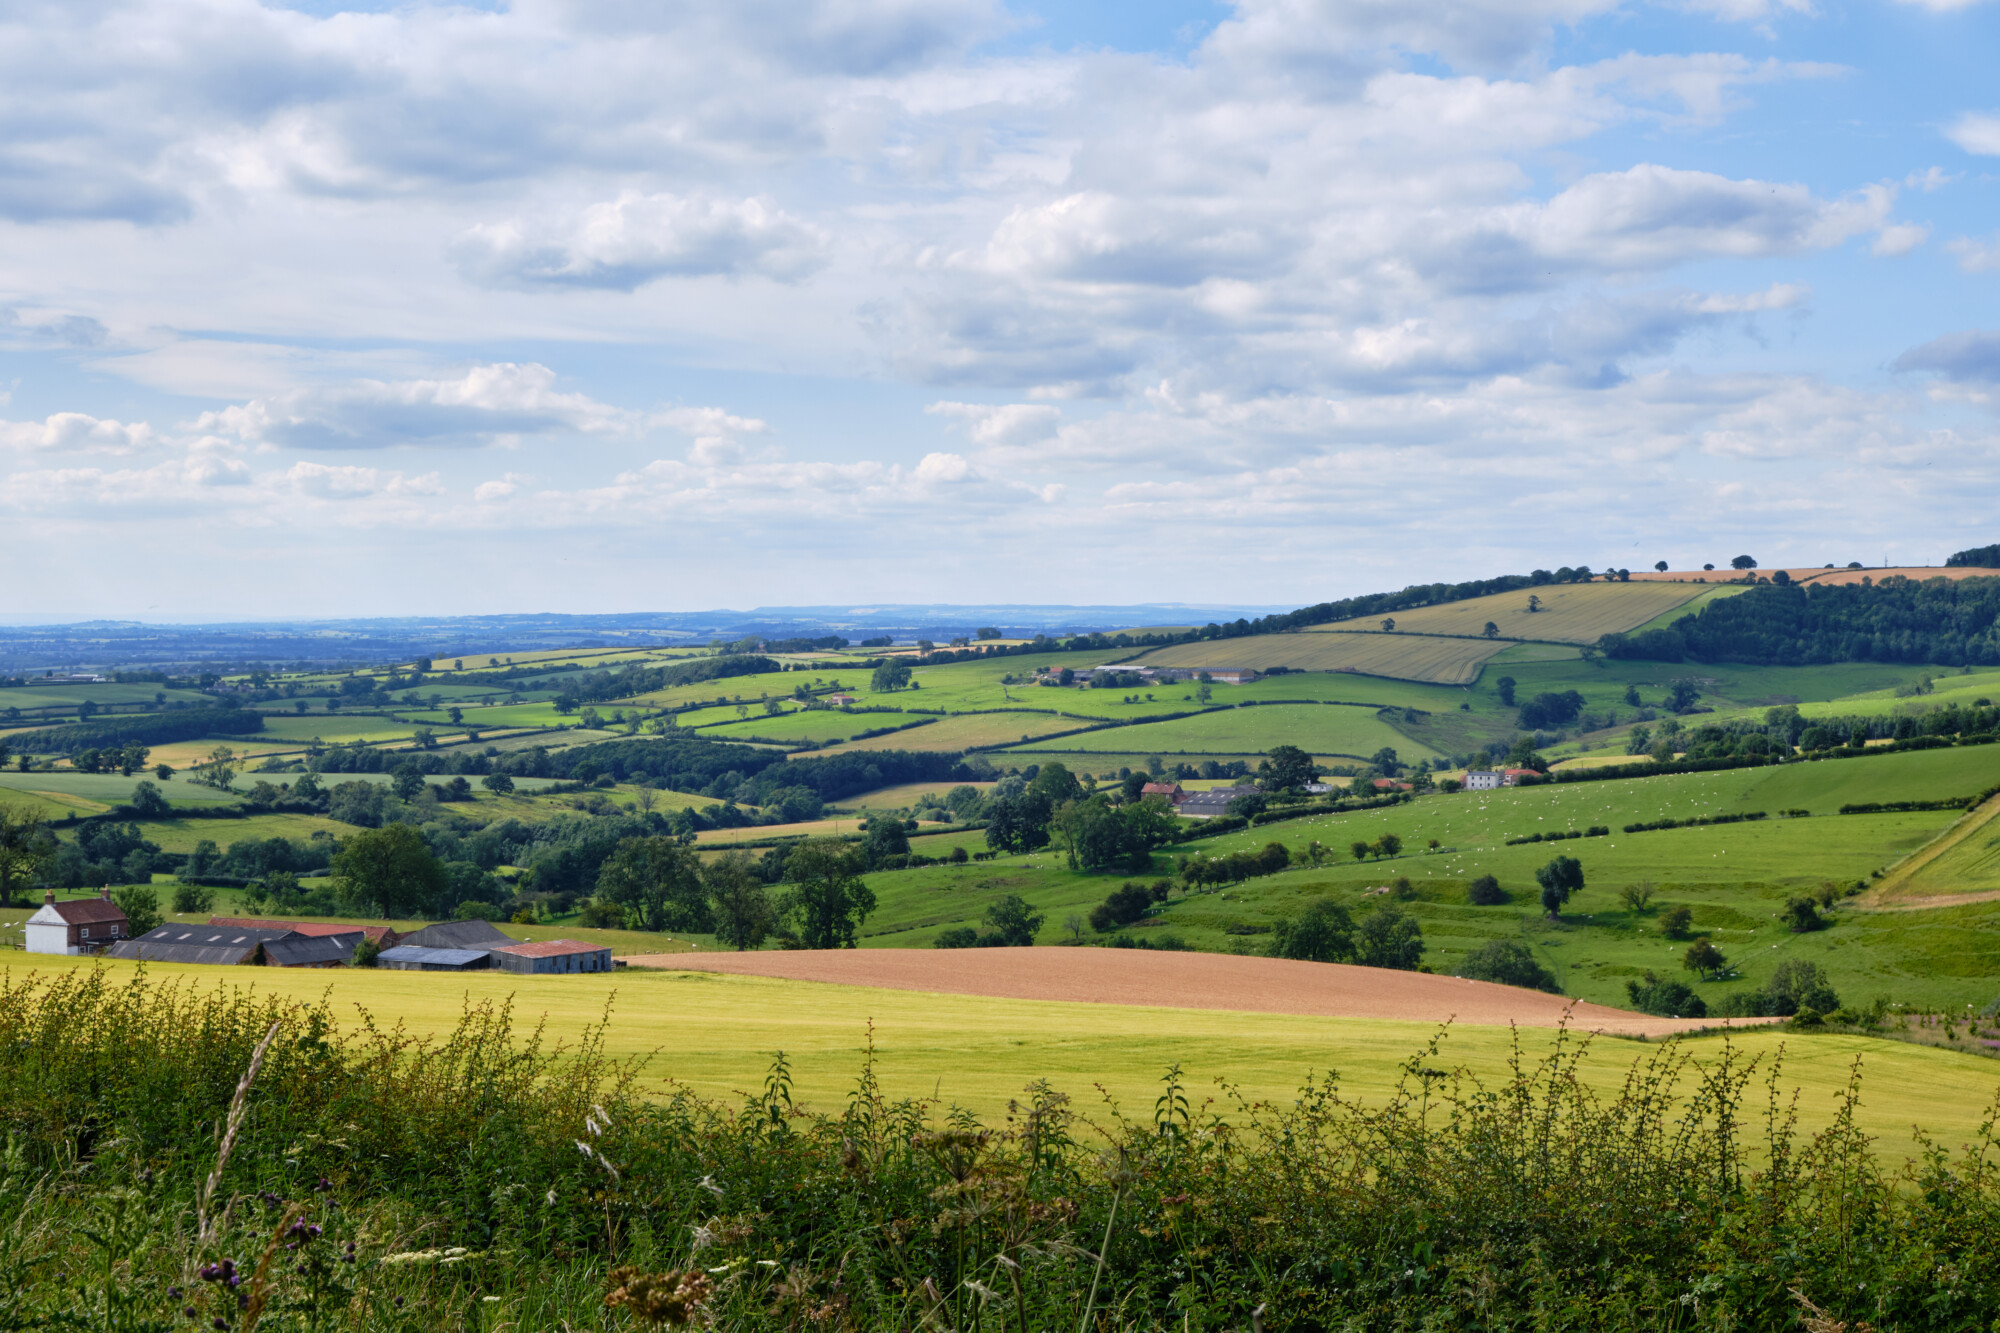 A colourful view over the Yorkshire Wolds valley with bright coloured fields and trees dotting the landscape under a blue sky with clouds